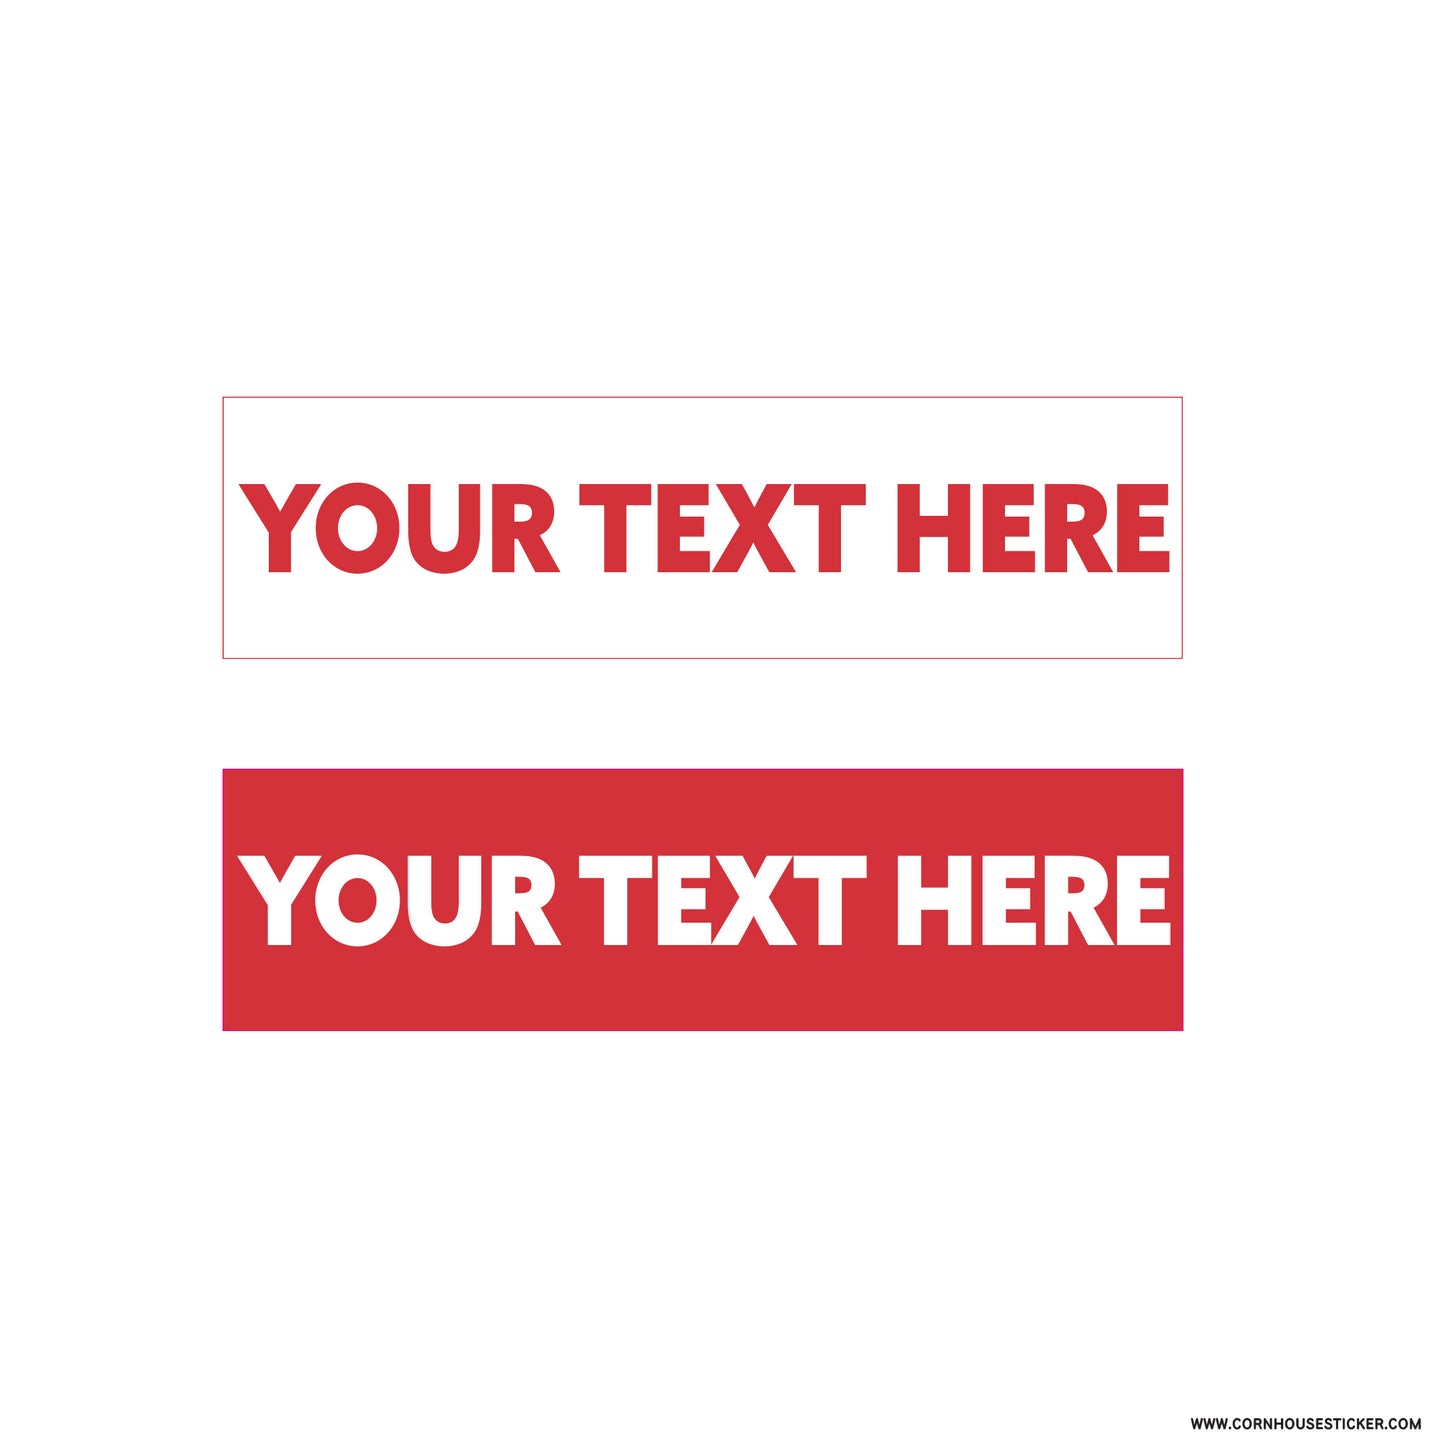 Custom text real estate stickers